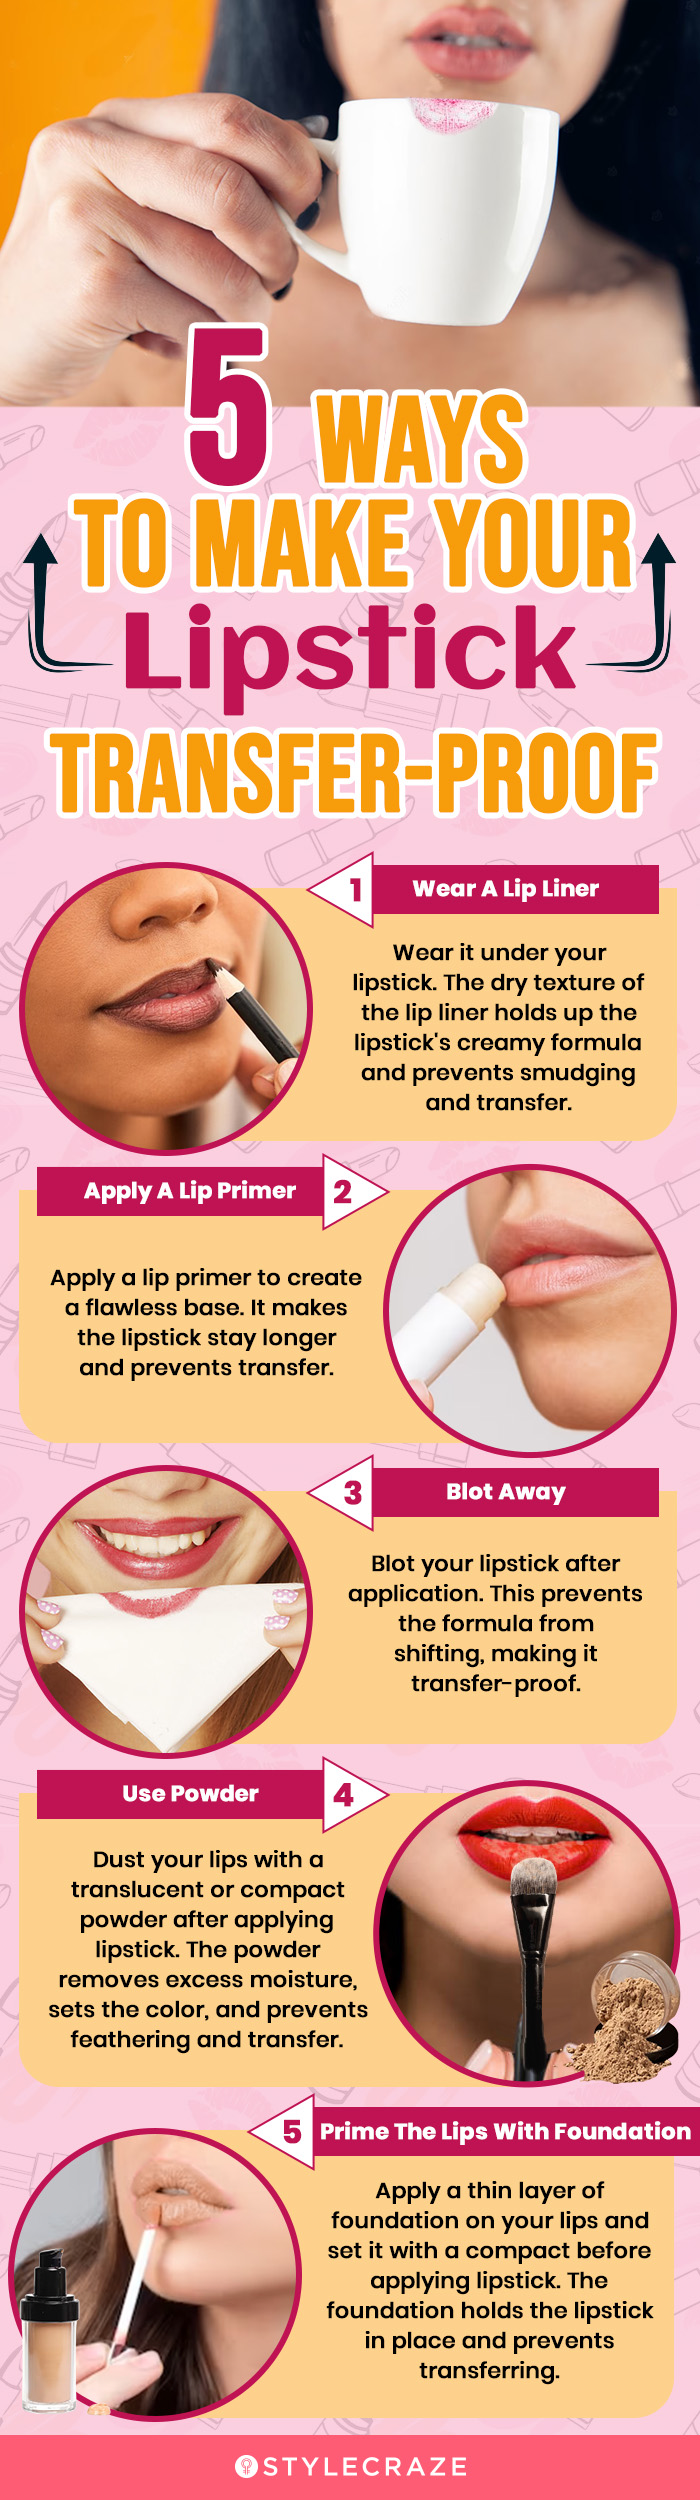 5 ways to make your lipstick transfer proof (infographic)